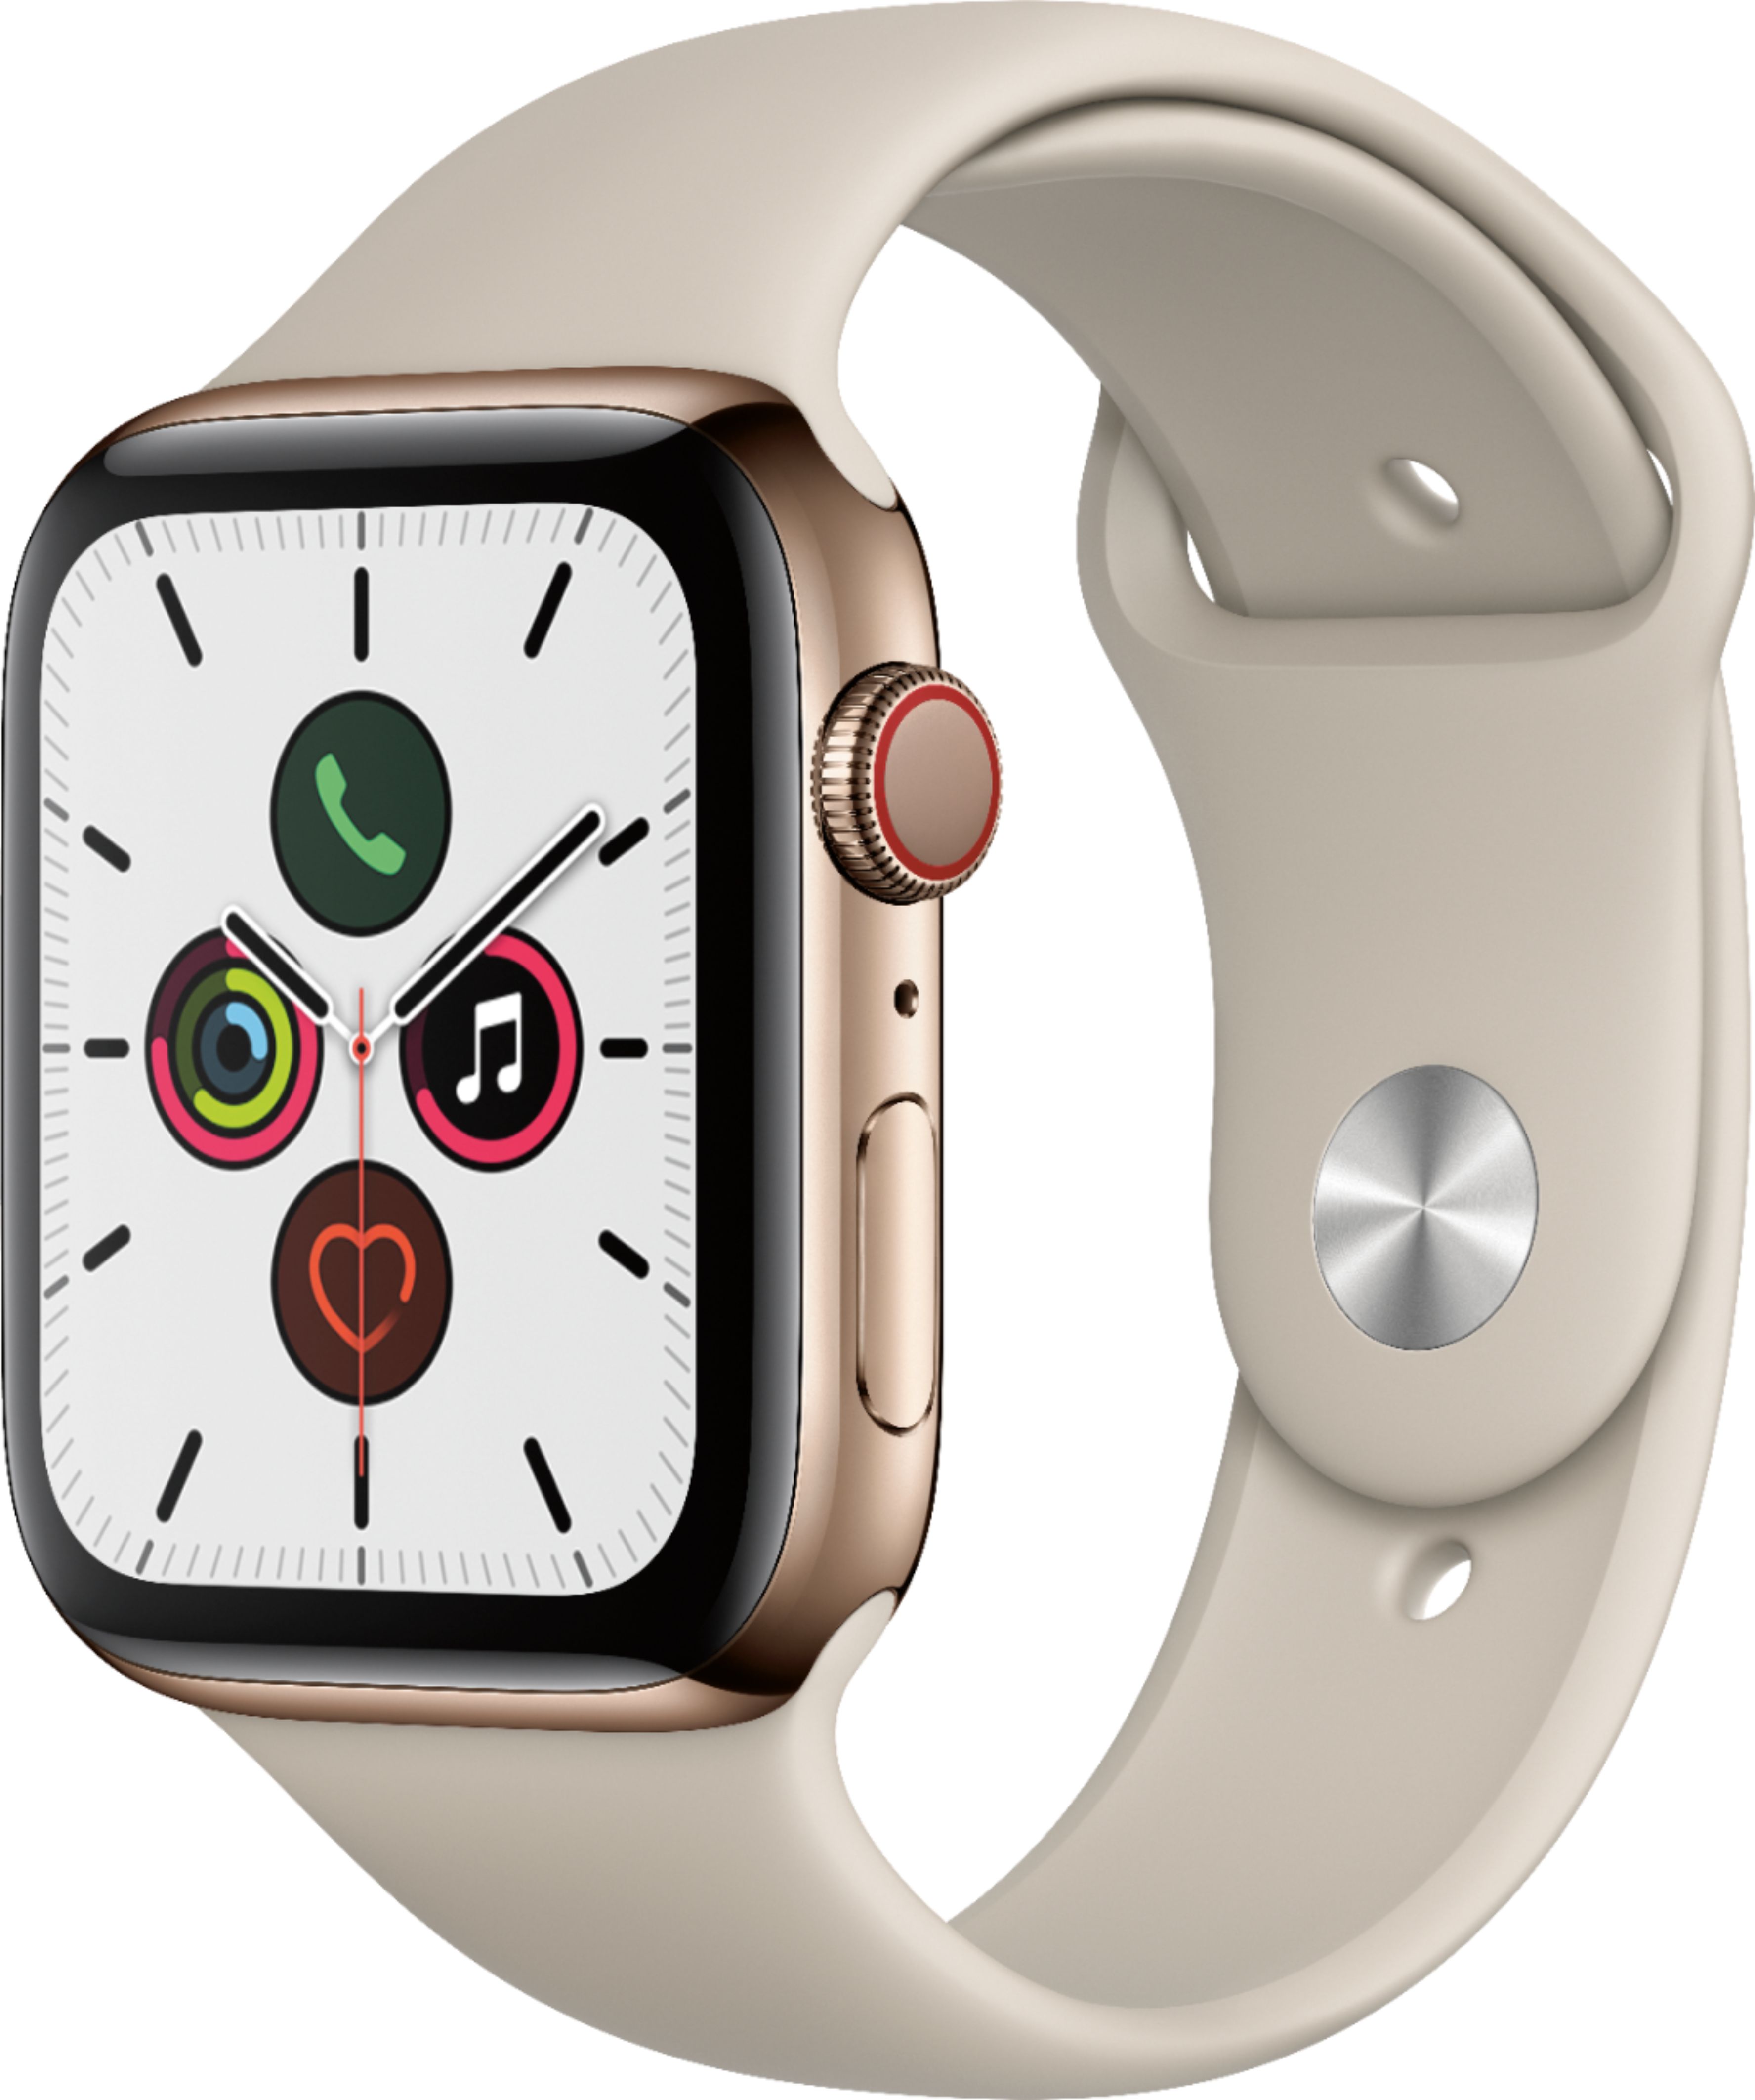 Bestbuy Apple Watch Series 5 (GPS + Cellular) 44mm Stainless Steel Case with Stone Sport Band Gold color only!-FS$300